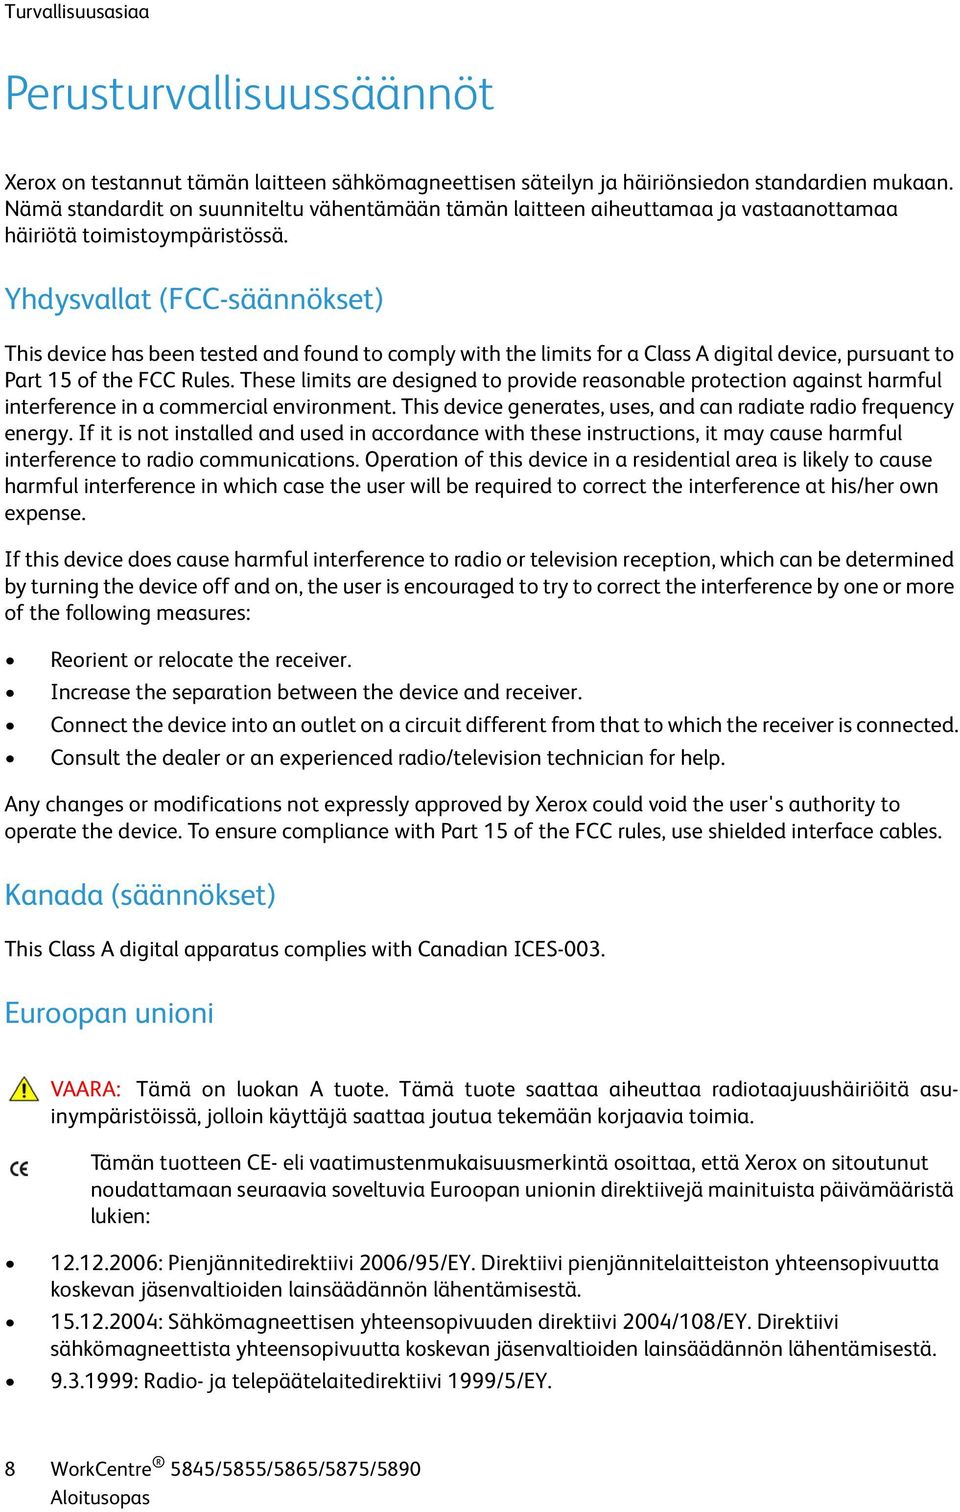 Yhdysvallat (FCC-säännökset) This device has been tested and found to comply with the limits for a Class A digital device, pursuant to Part 15 of the FCC Rules.